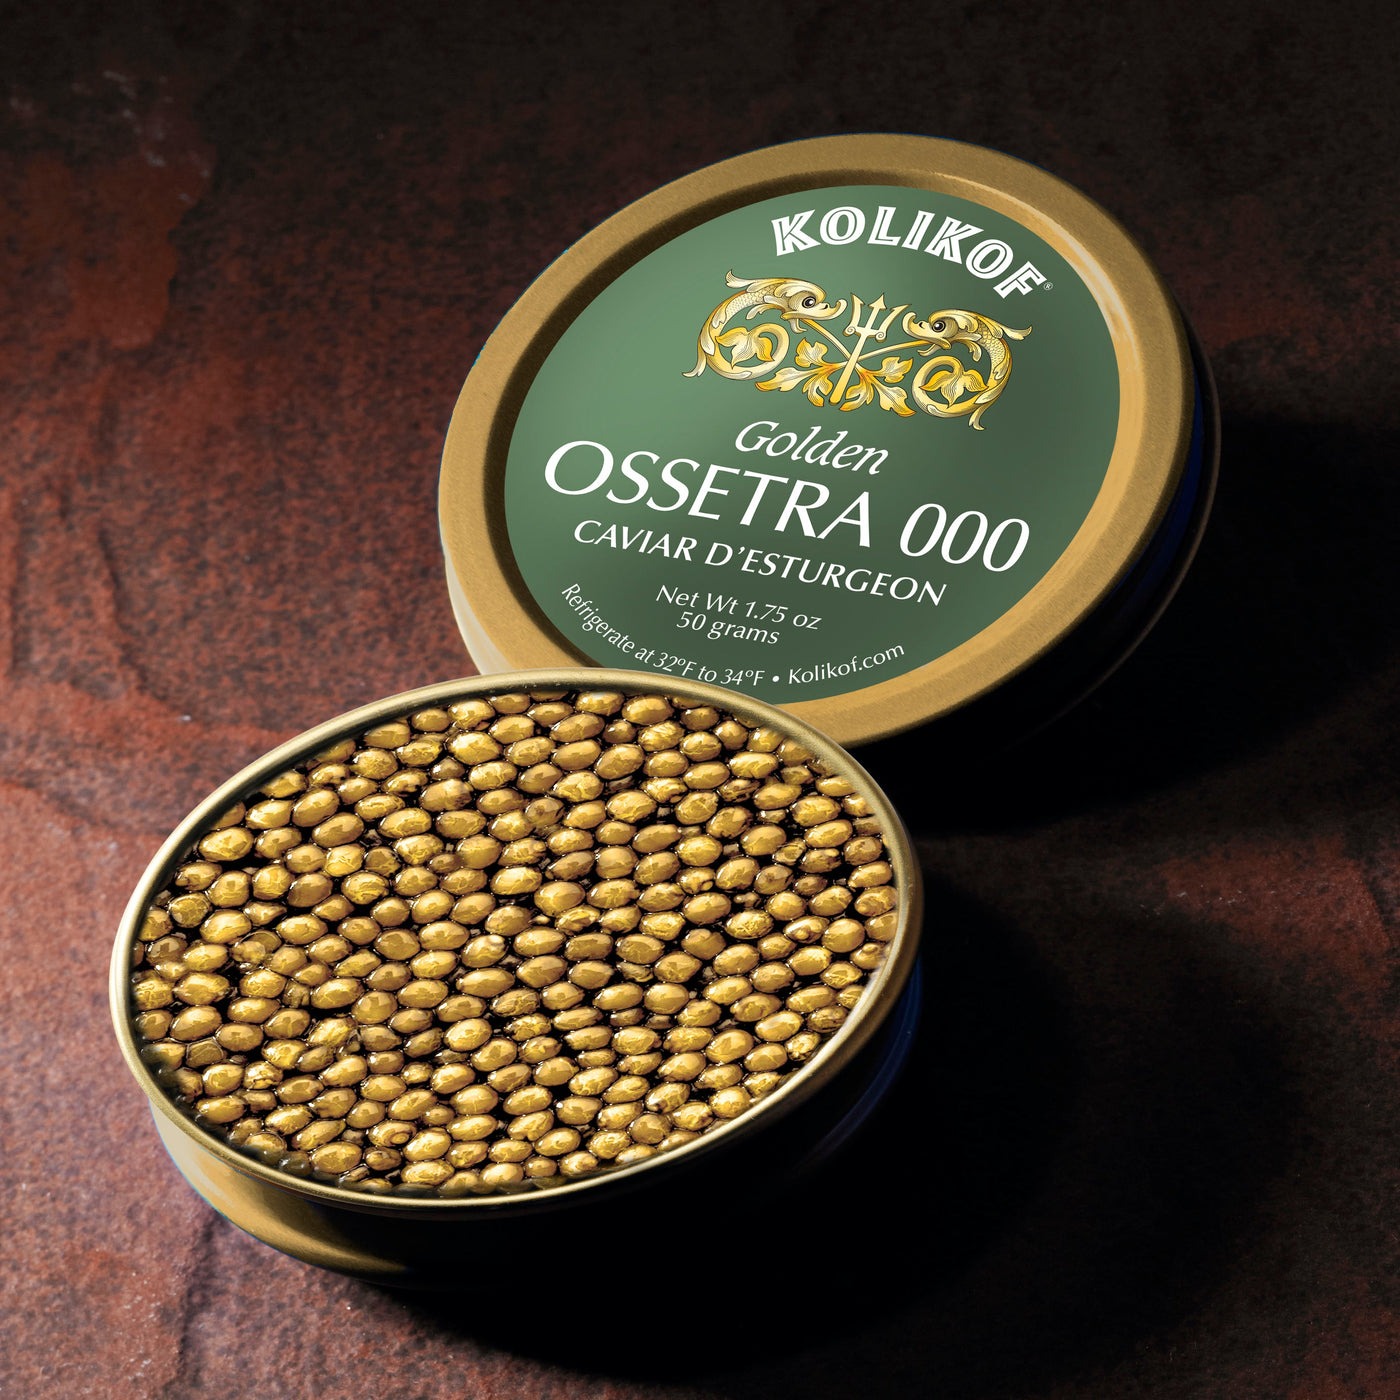 Russian Ossetra Caviar To Buy Online. The Best Brand of Caviar.